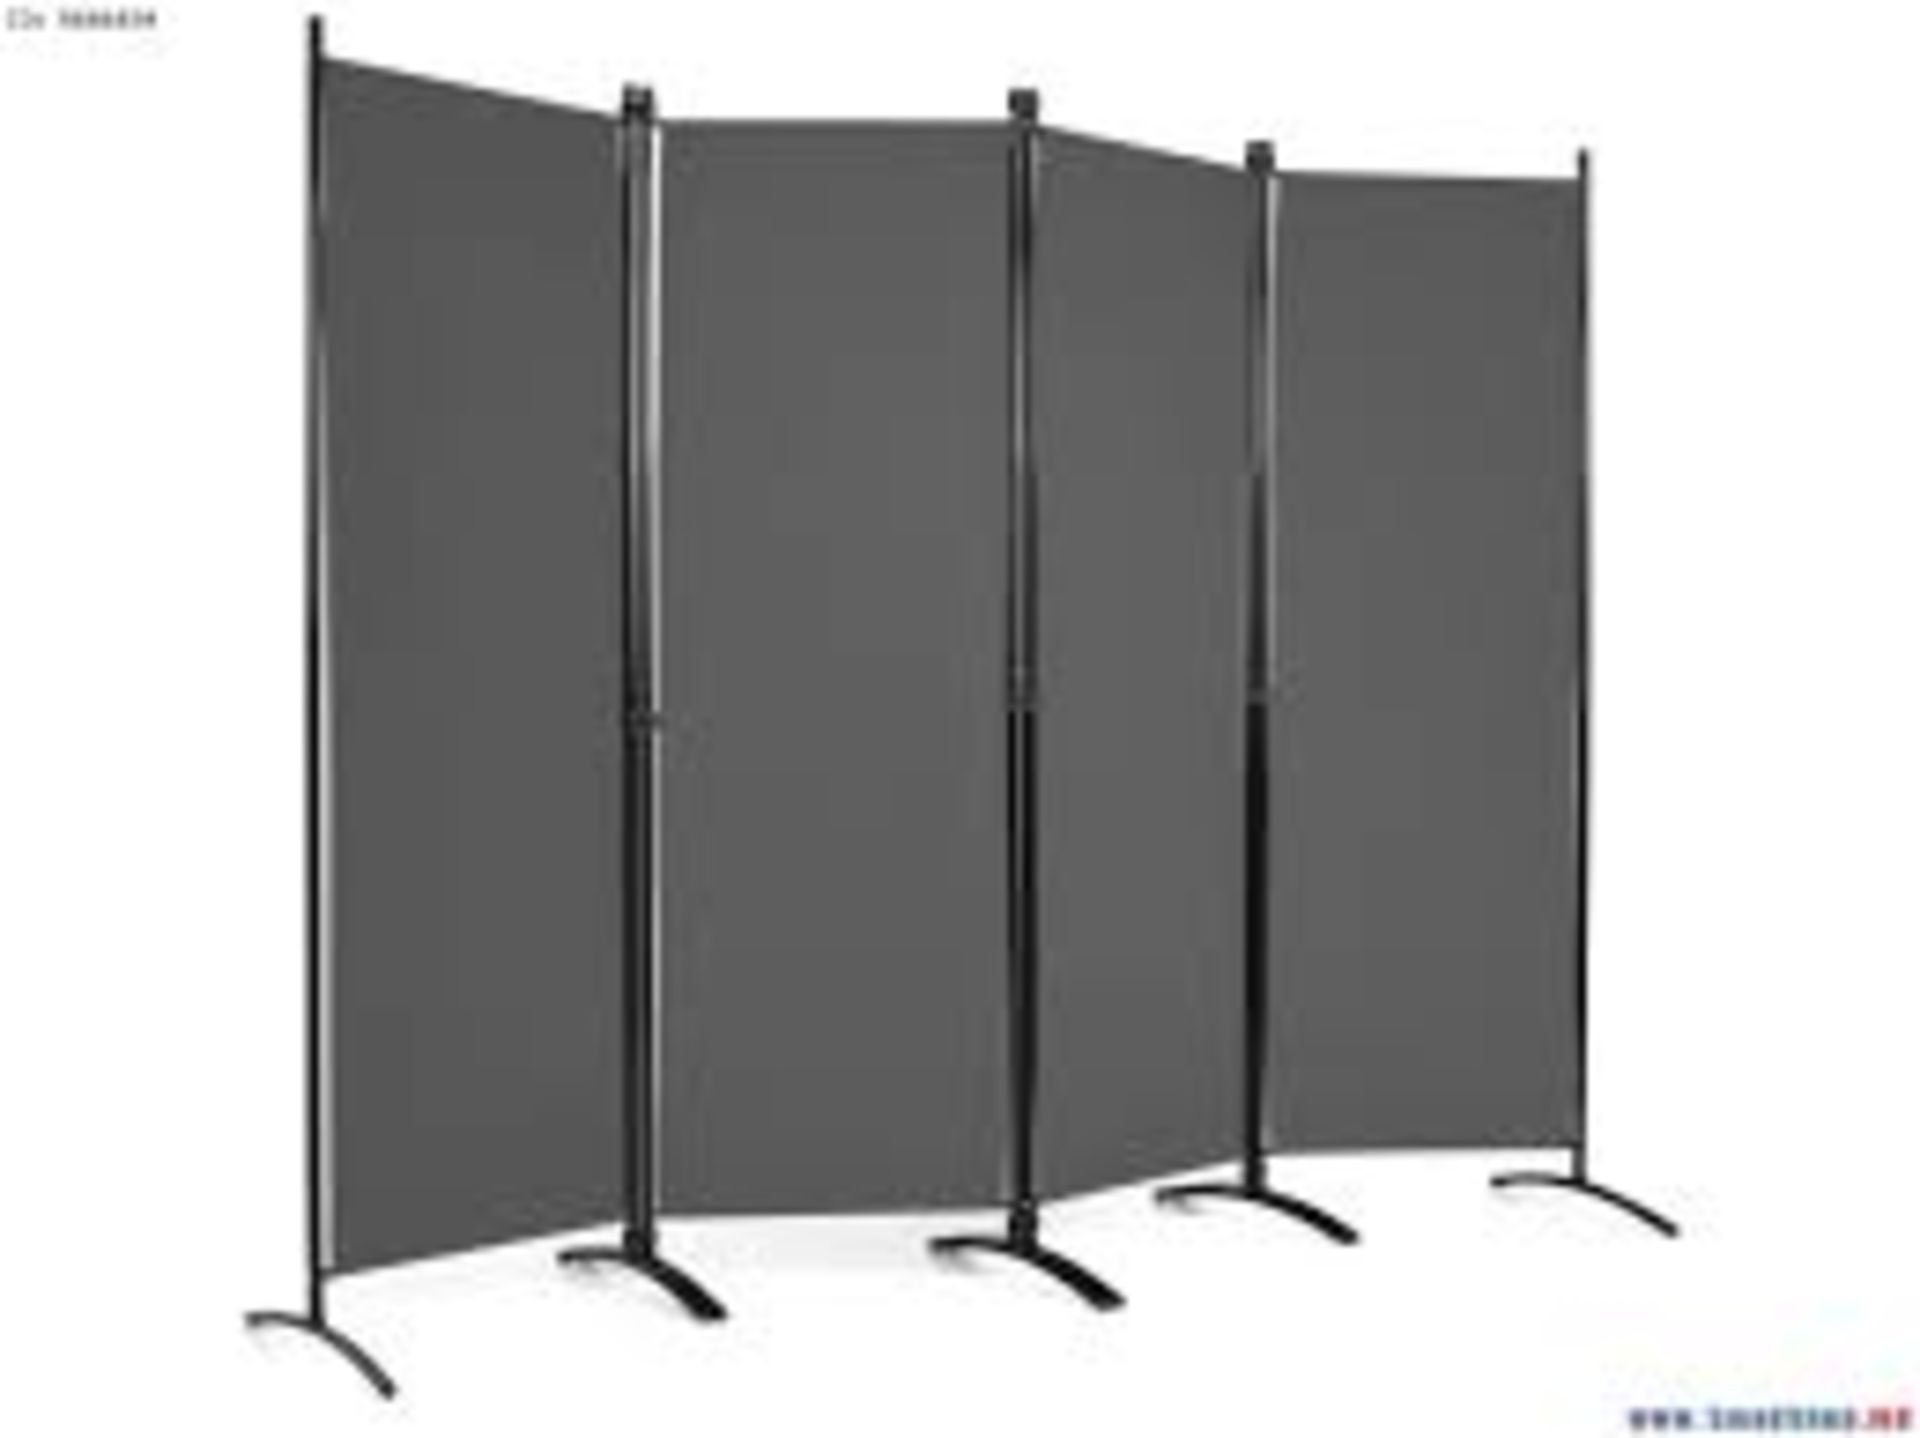 Folding Room Divider 4 Panel Wall Privacy Screen Protector Home. - R13a.3.